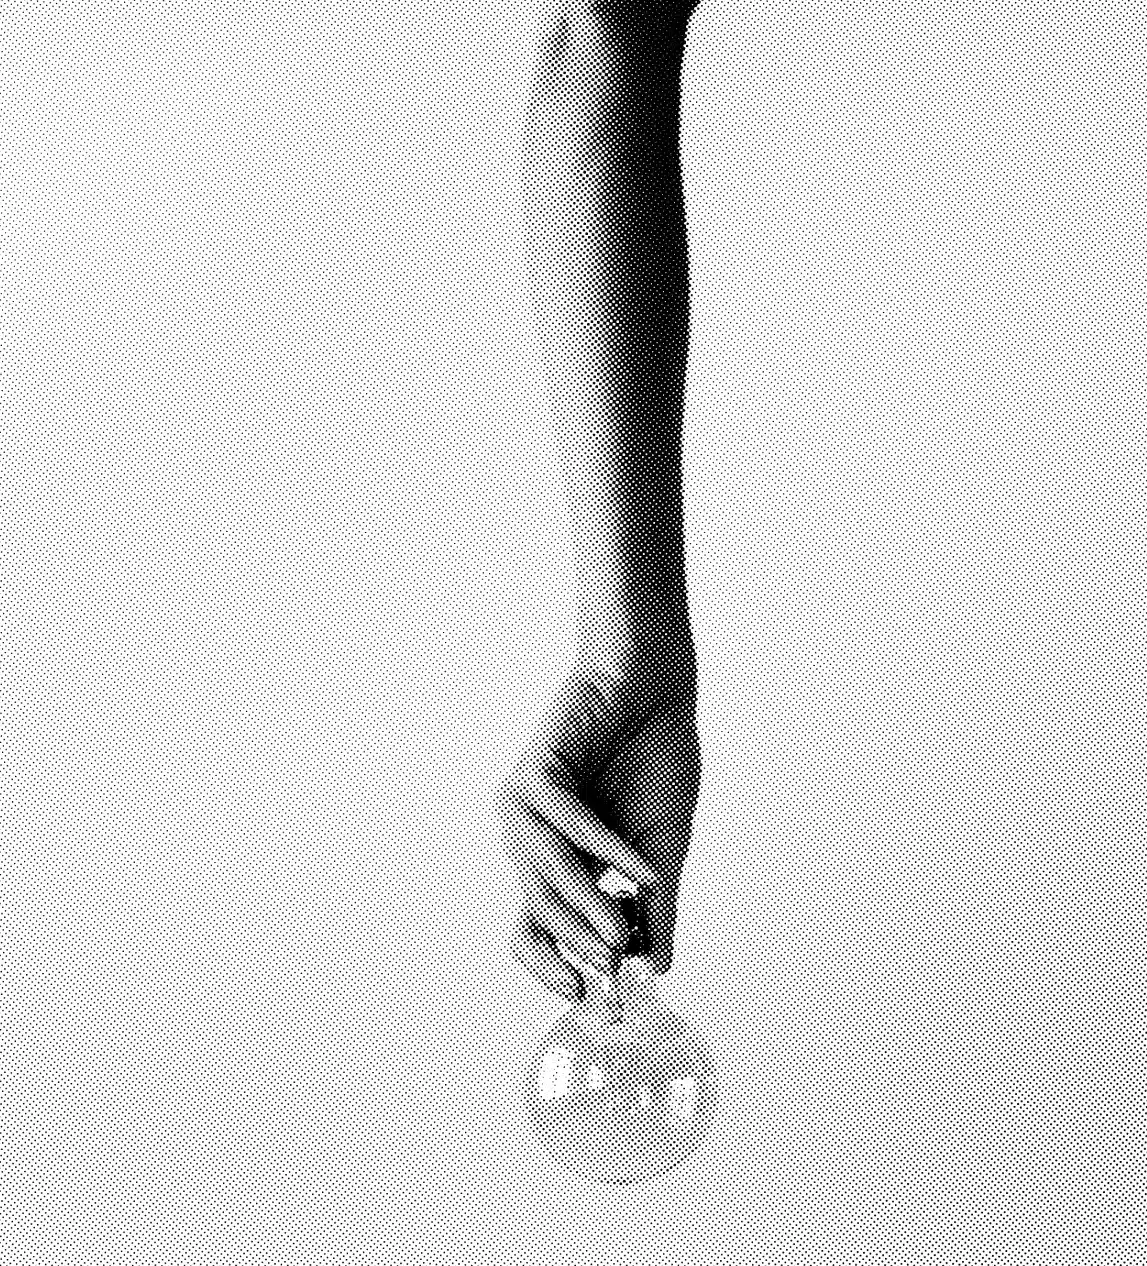 A grayscale image shows a person’s arm and hand extended downwards, holding a round glass object, resembling a light bulb or flask, by the fingertips. The background is plain, and the image has a textured, dotted pattern, giving it a vintage or marketing feel.